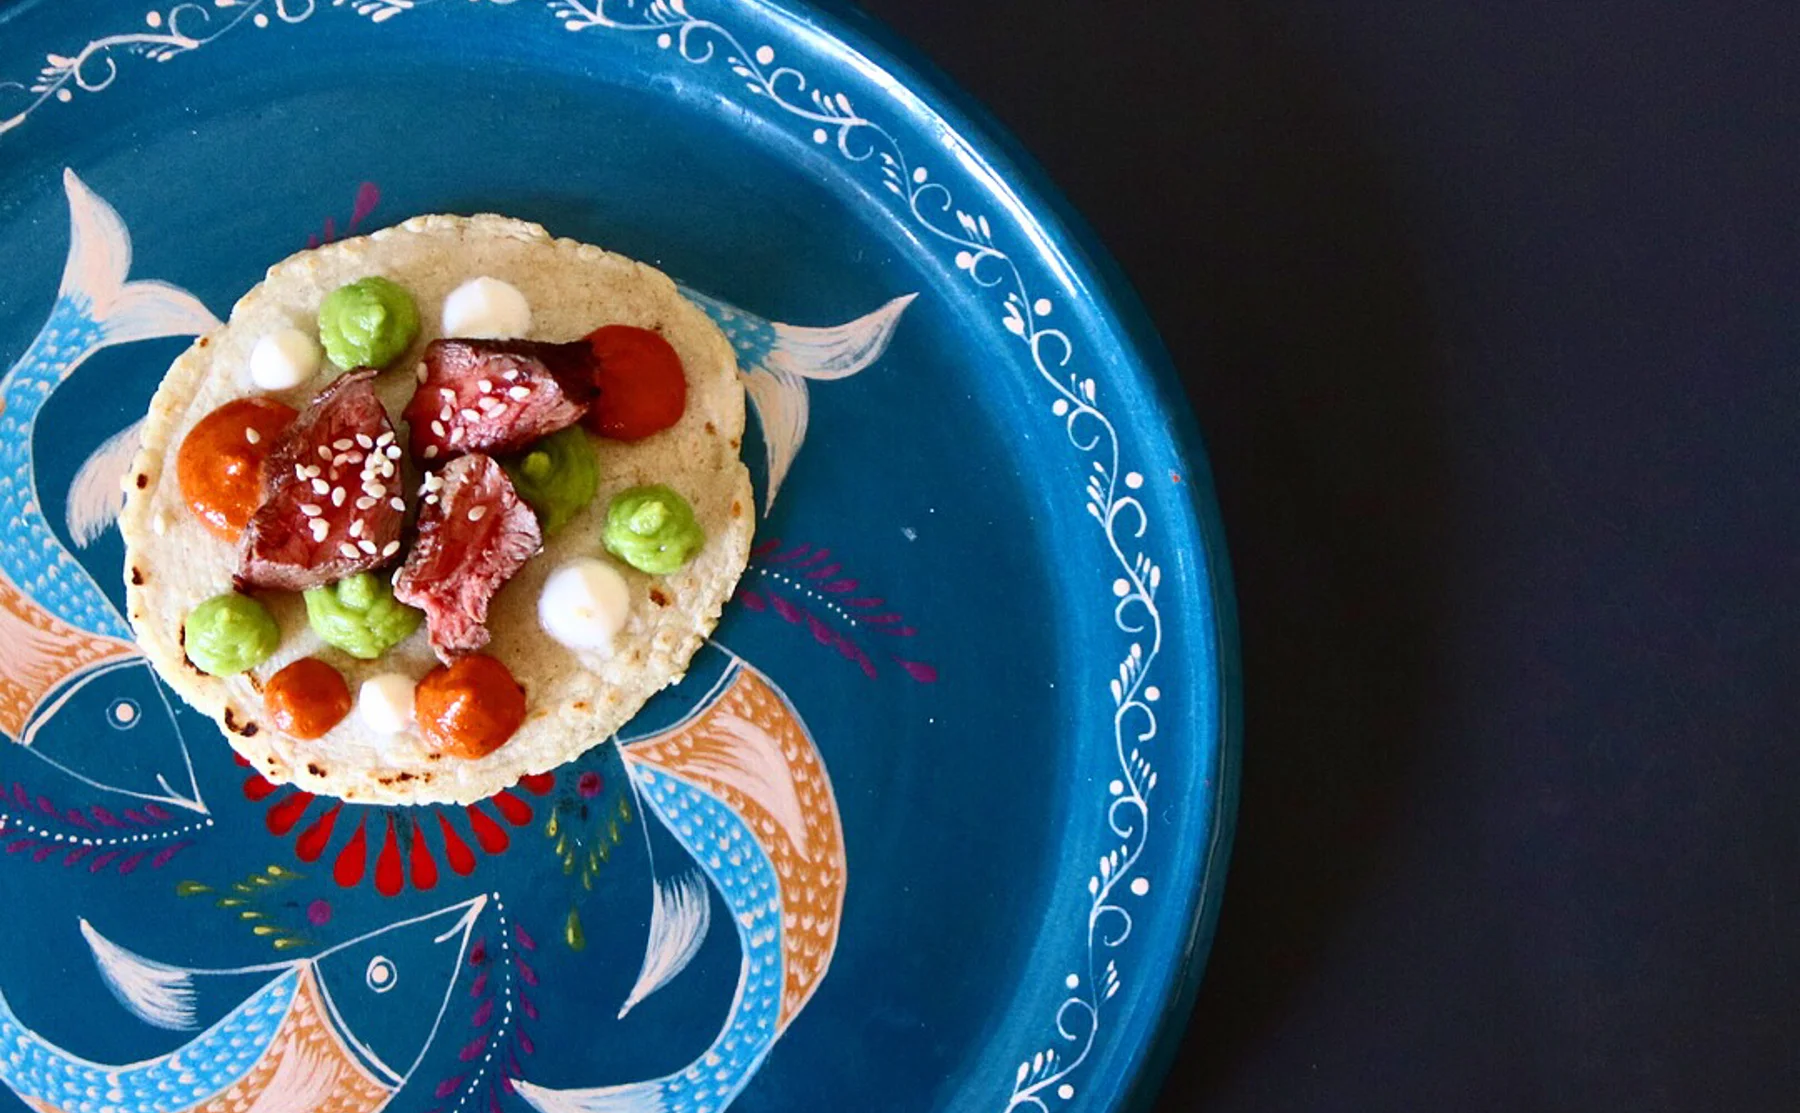 Private Dining - RANDE's One-of-a-Kind Mexican Supper Club in Dalston - 1283938